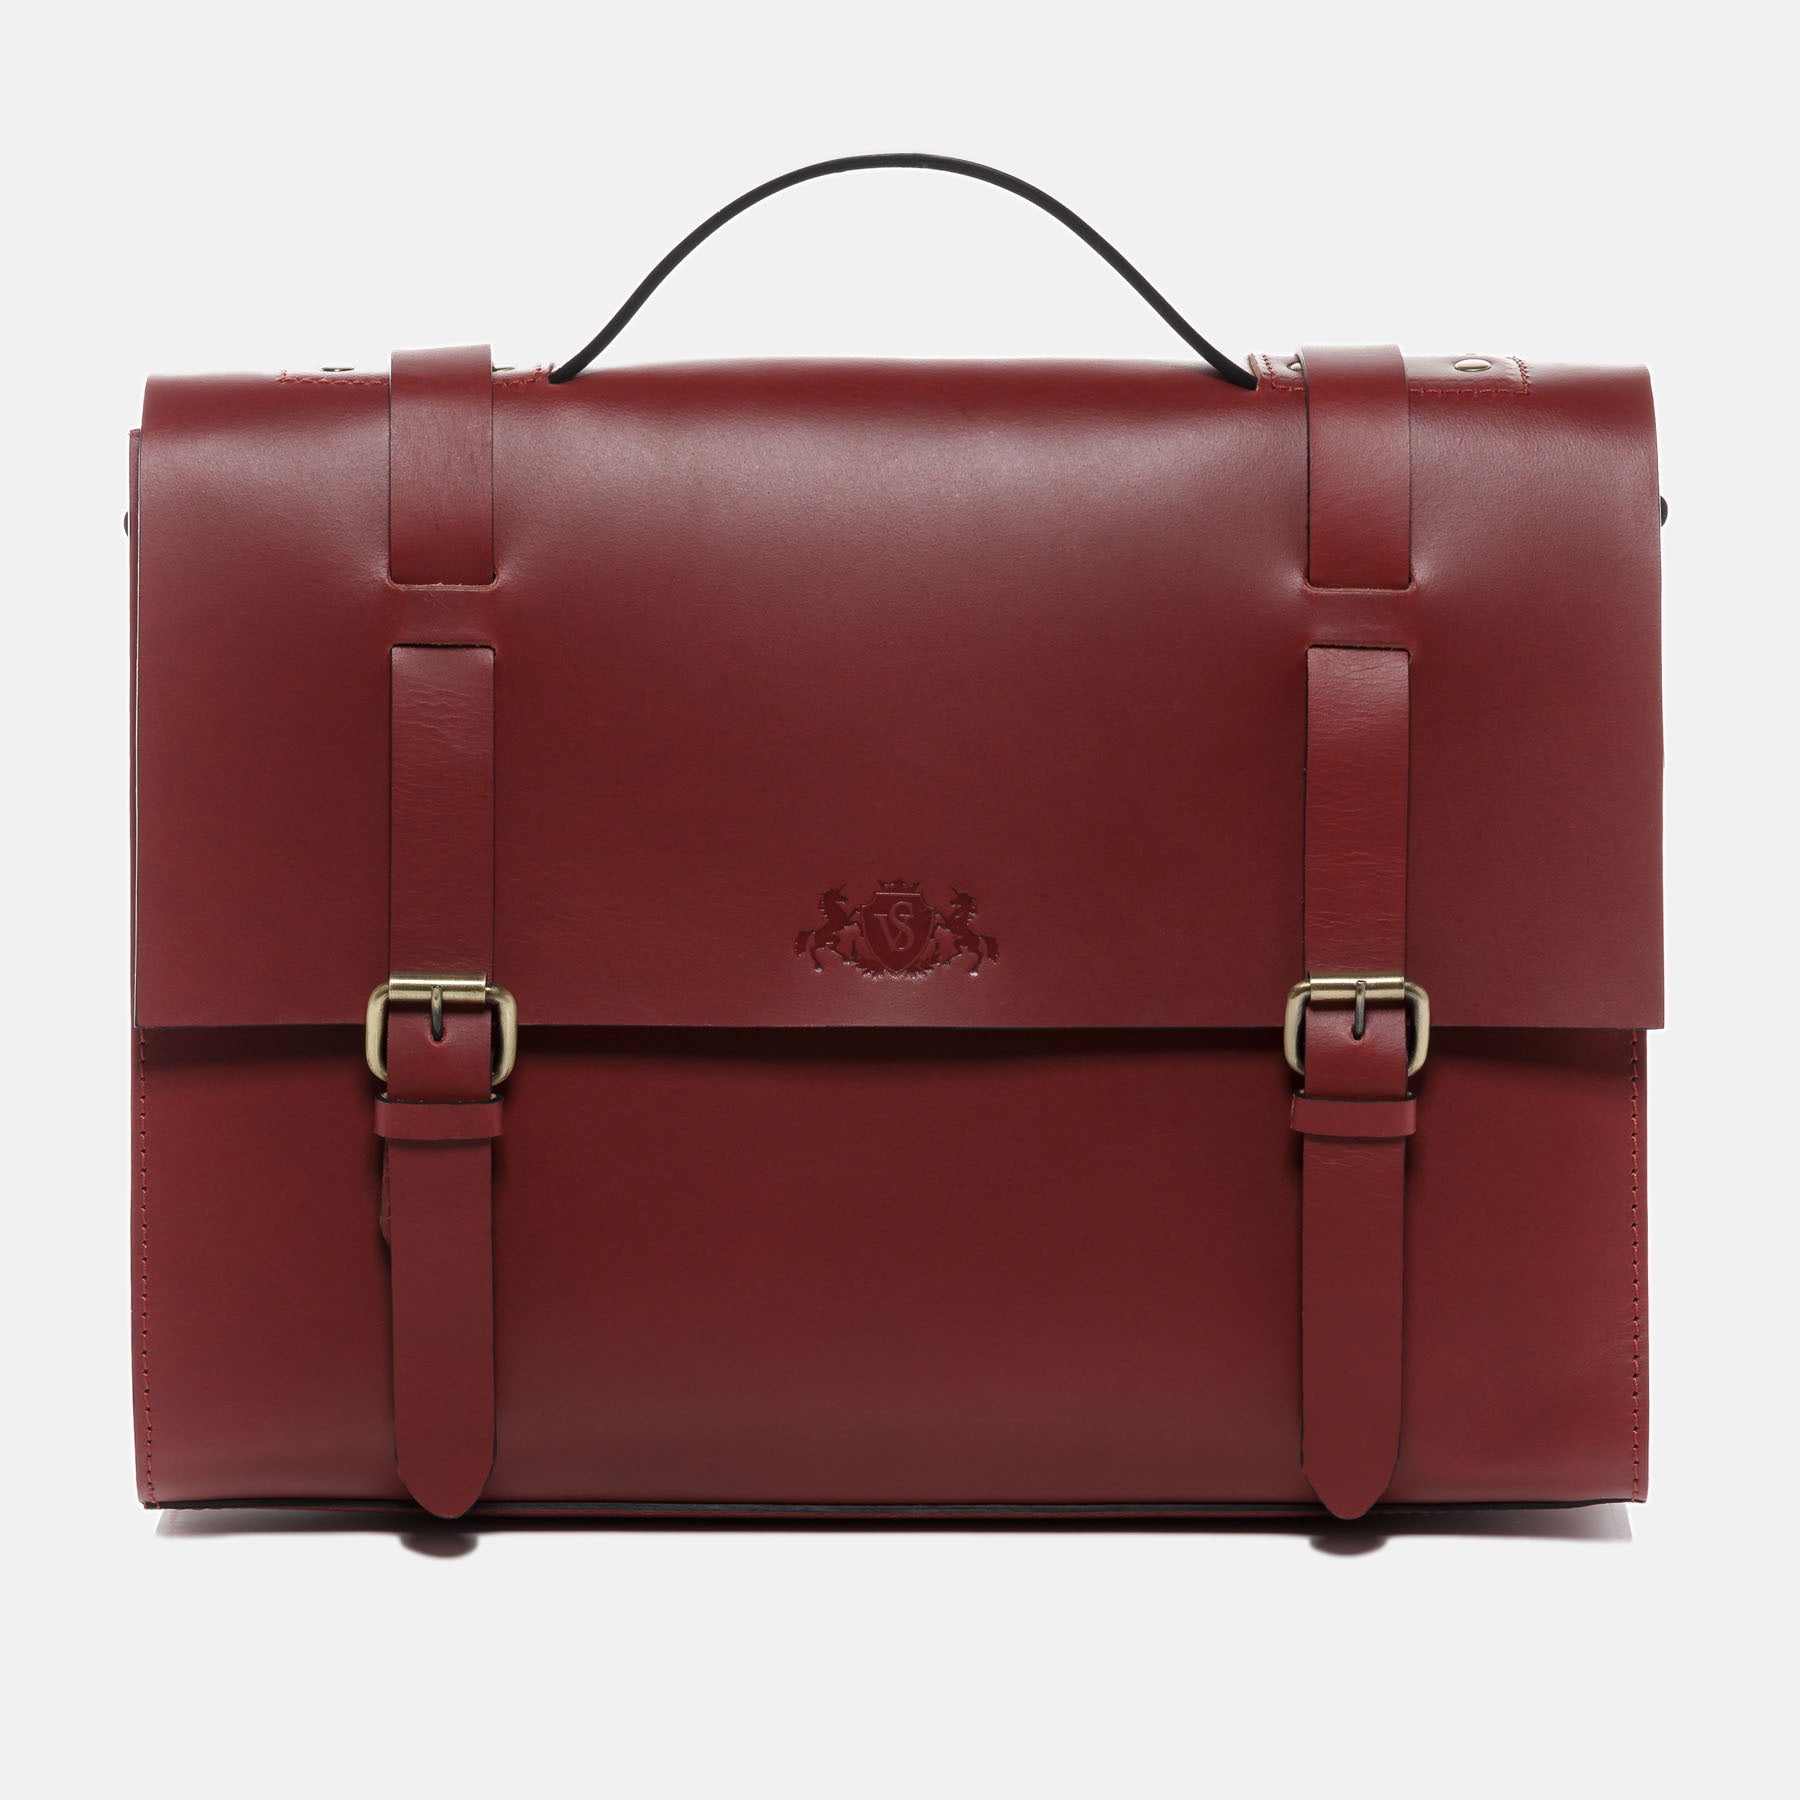 Briefcase BOSTON saddle leather red